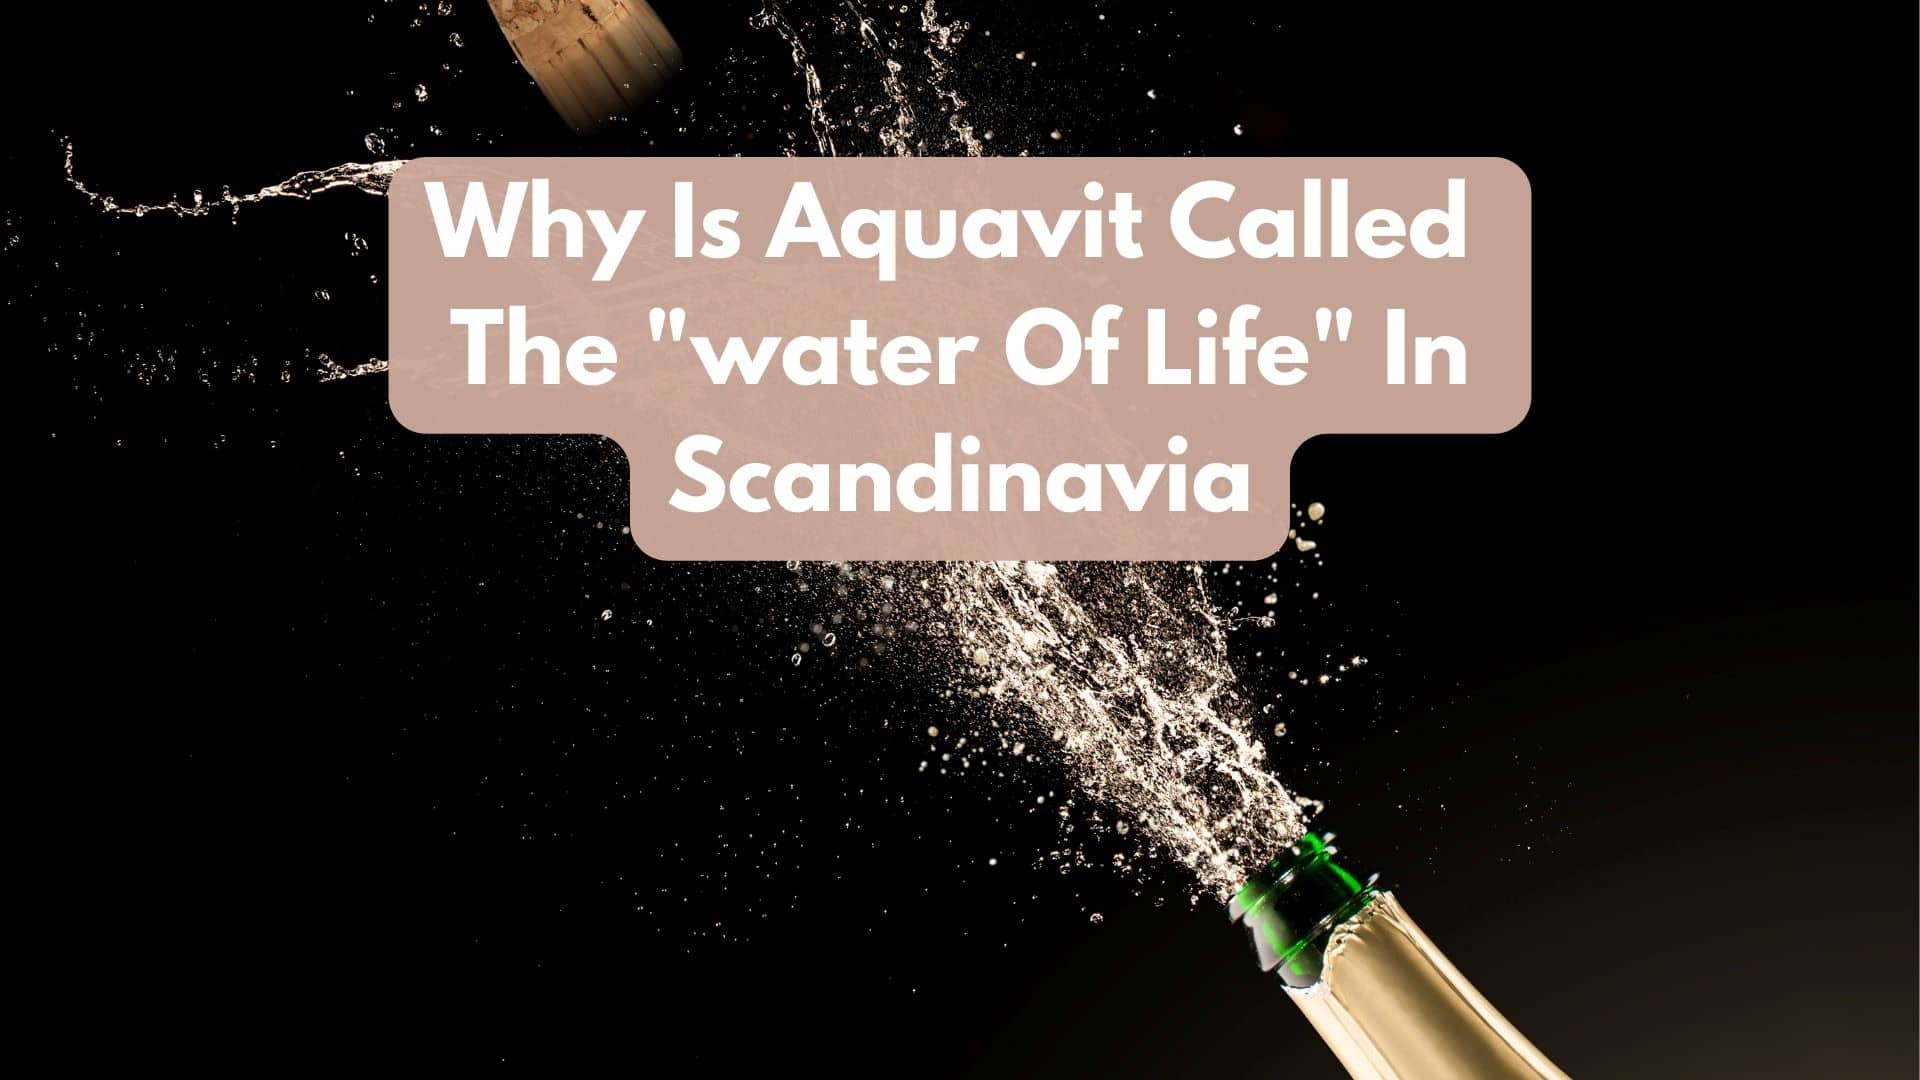 Why Is Aquavit Called The "water Of Life" In Scandinavia?